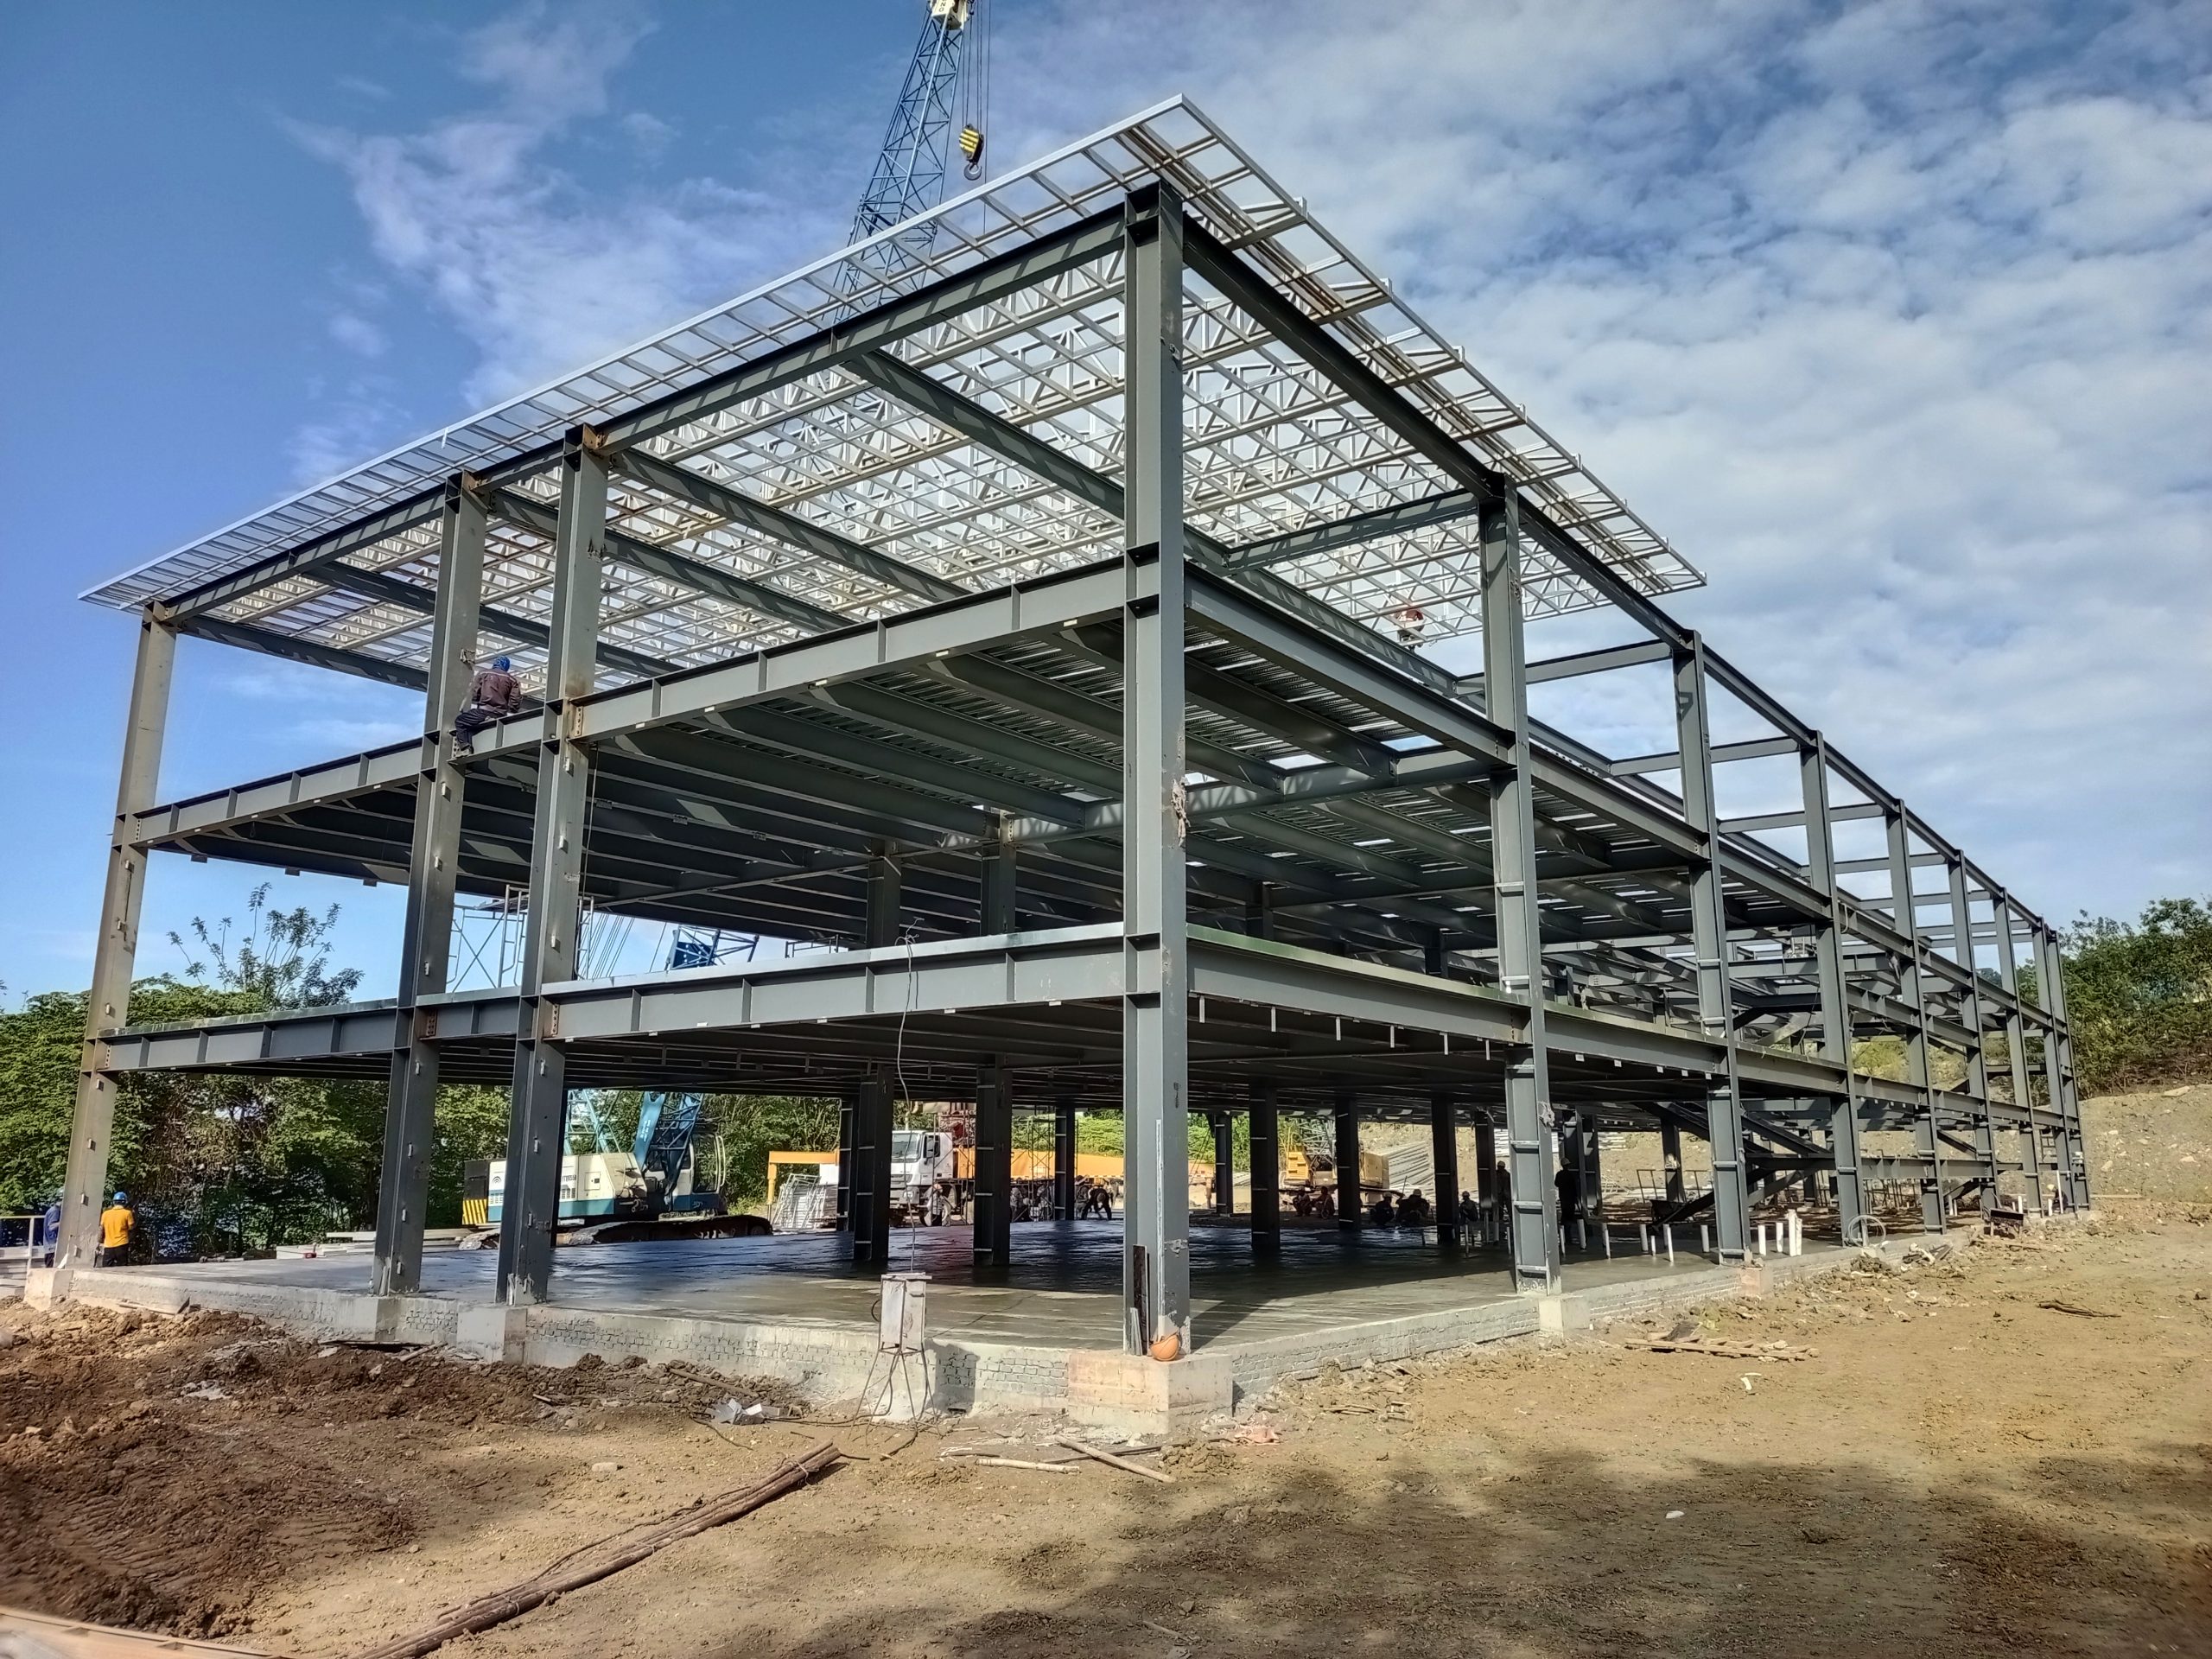 Lida Group debuts new high-tech steel structure production facility to mass produce durable prefabricated homes at unmatched speeds.